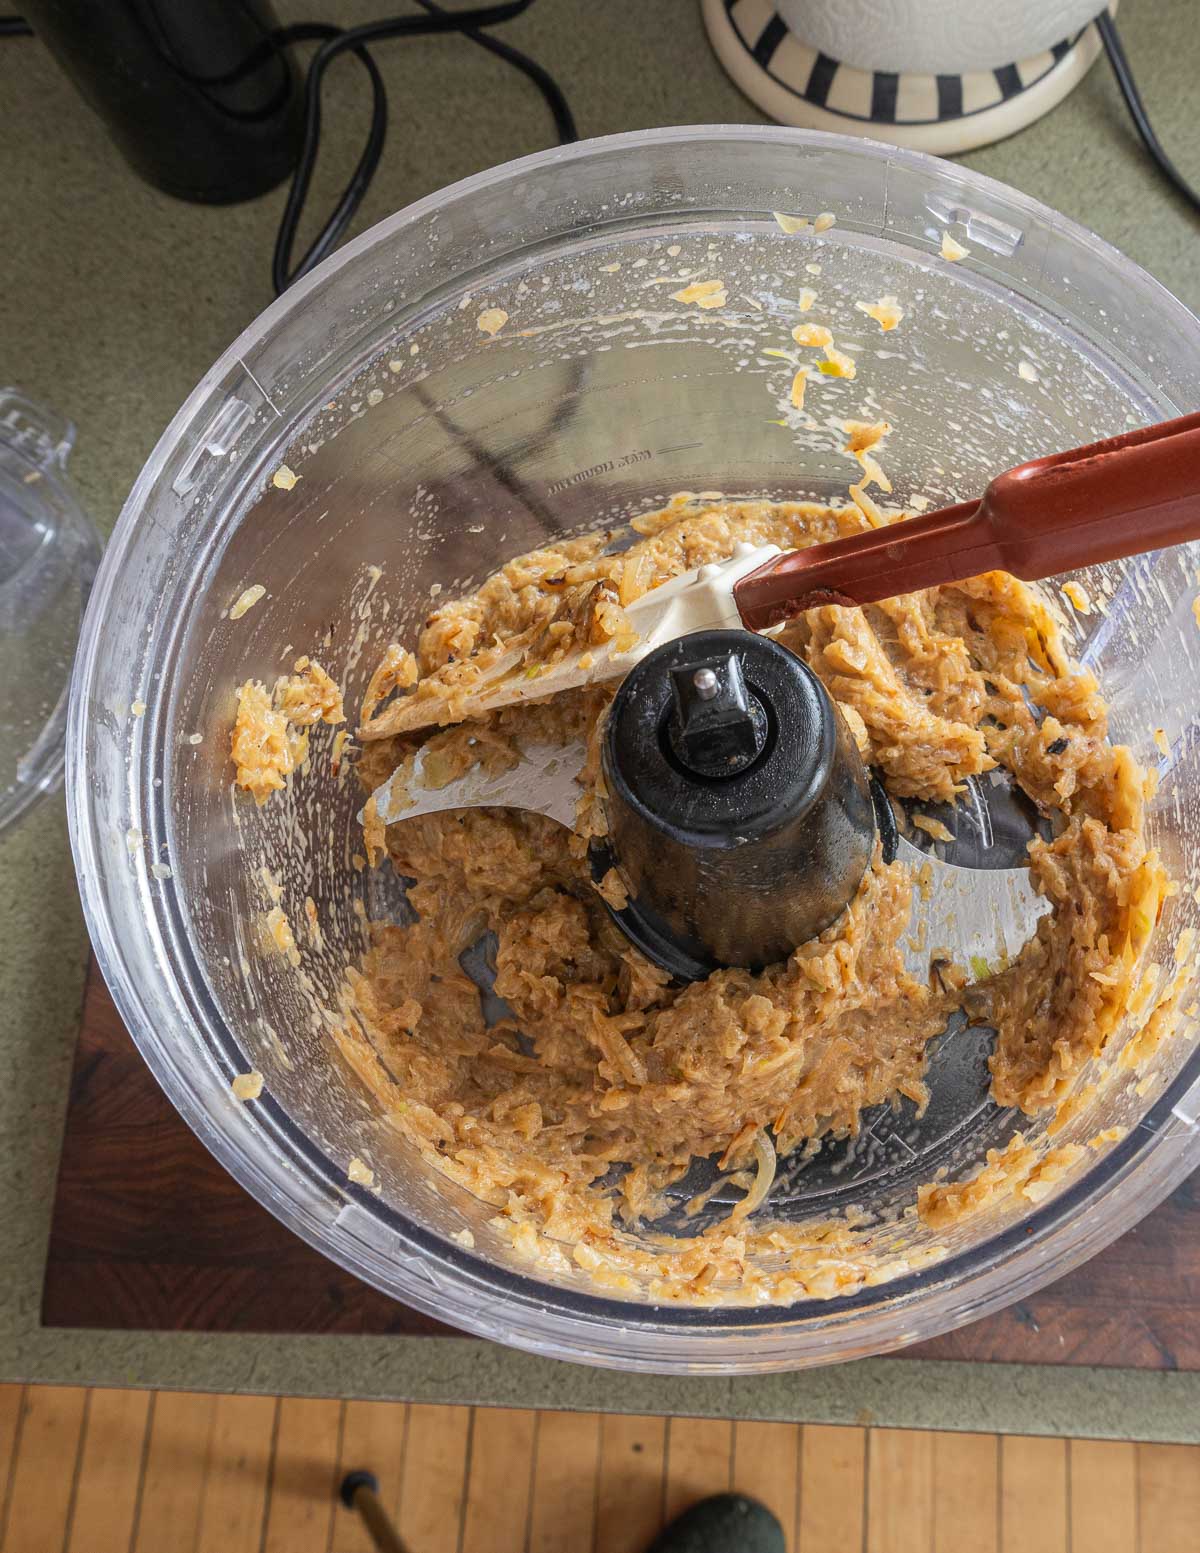 Pureeing caramelized onions in a food processor.